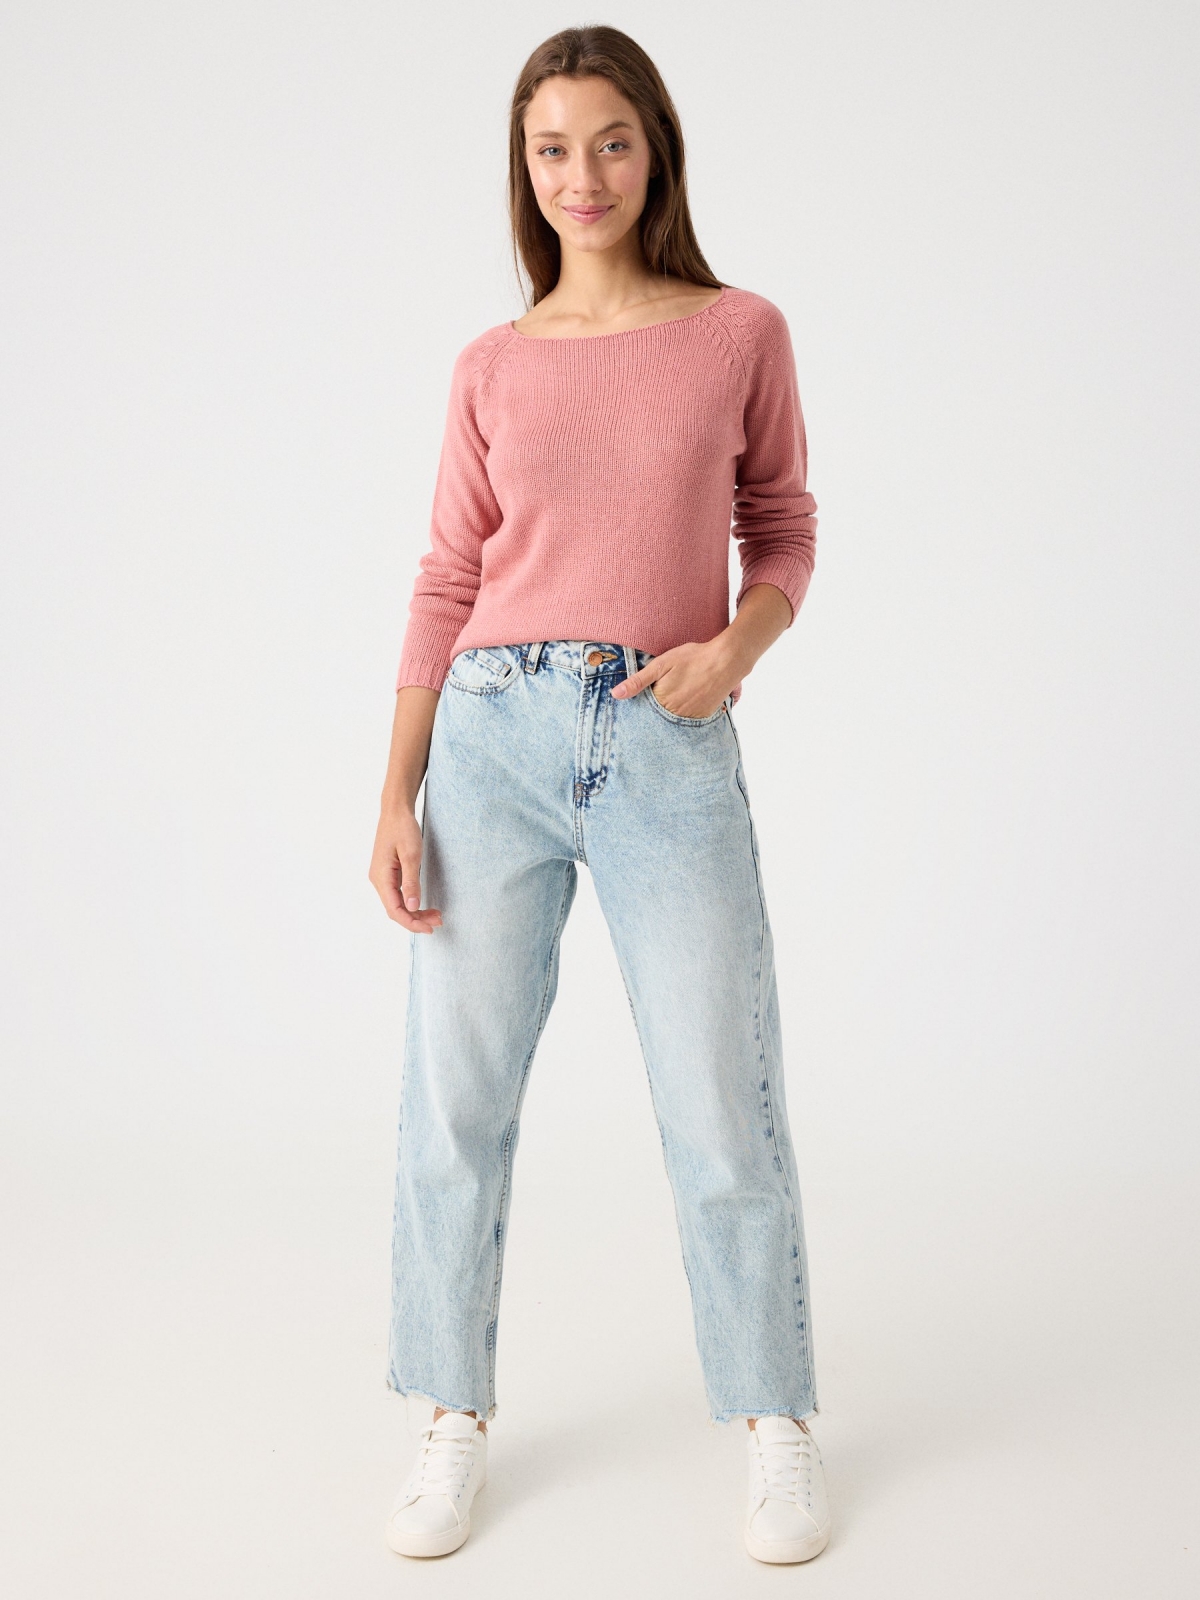 Basic round neck sweater pink front view